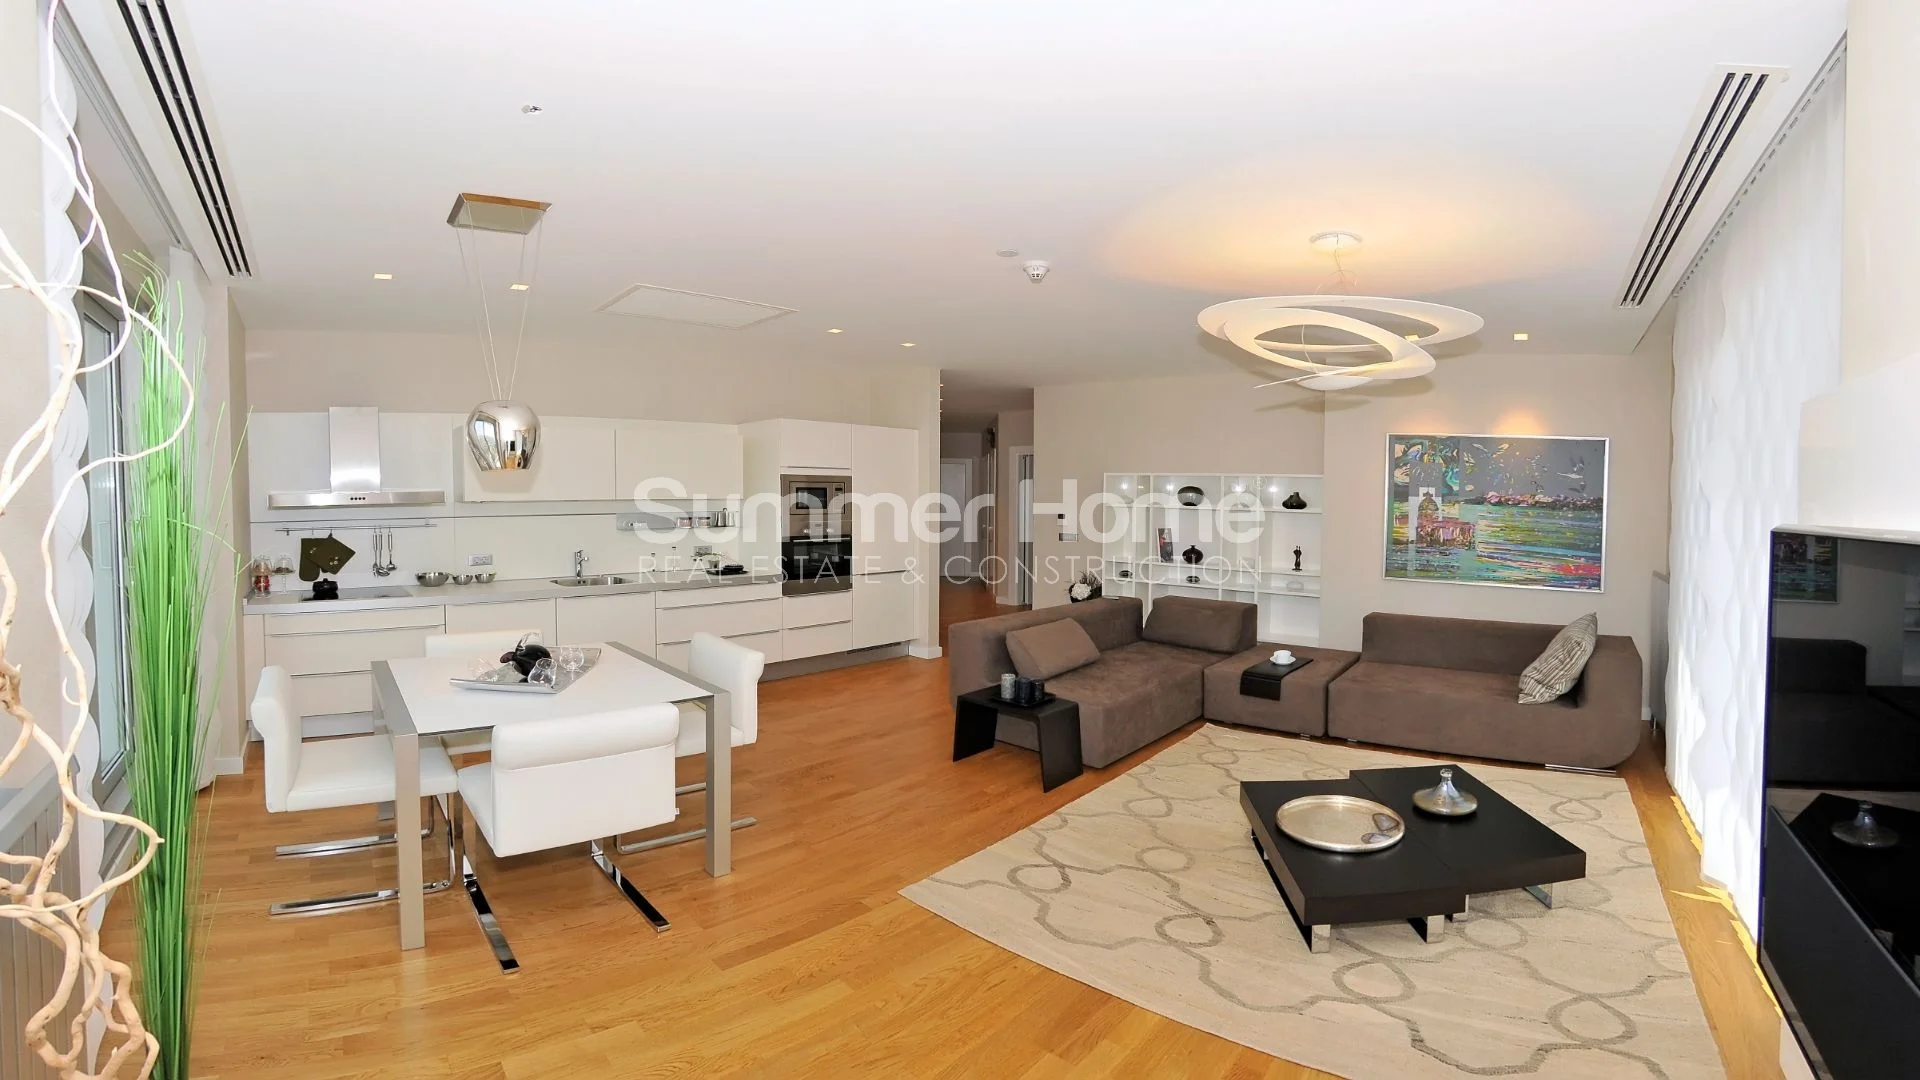 Exceptional apartments in Sisli district of Istanbul Interior - 24